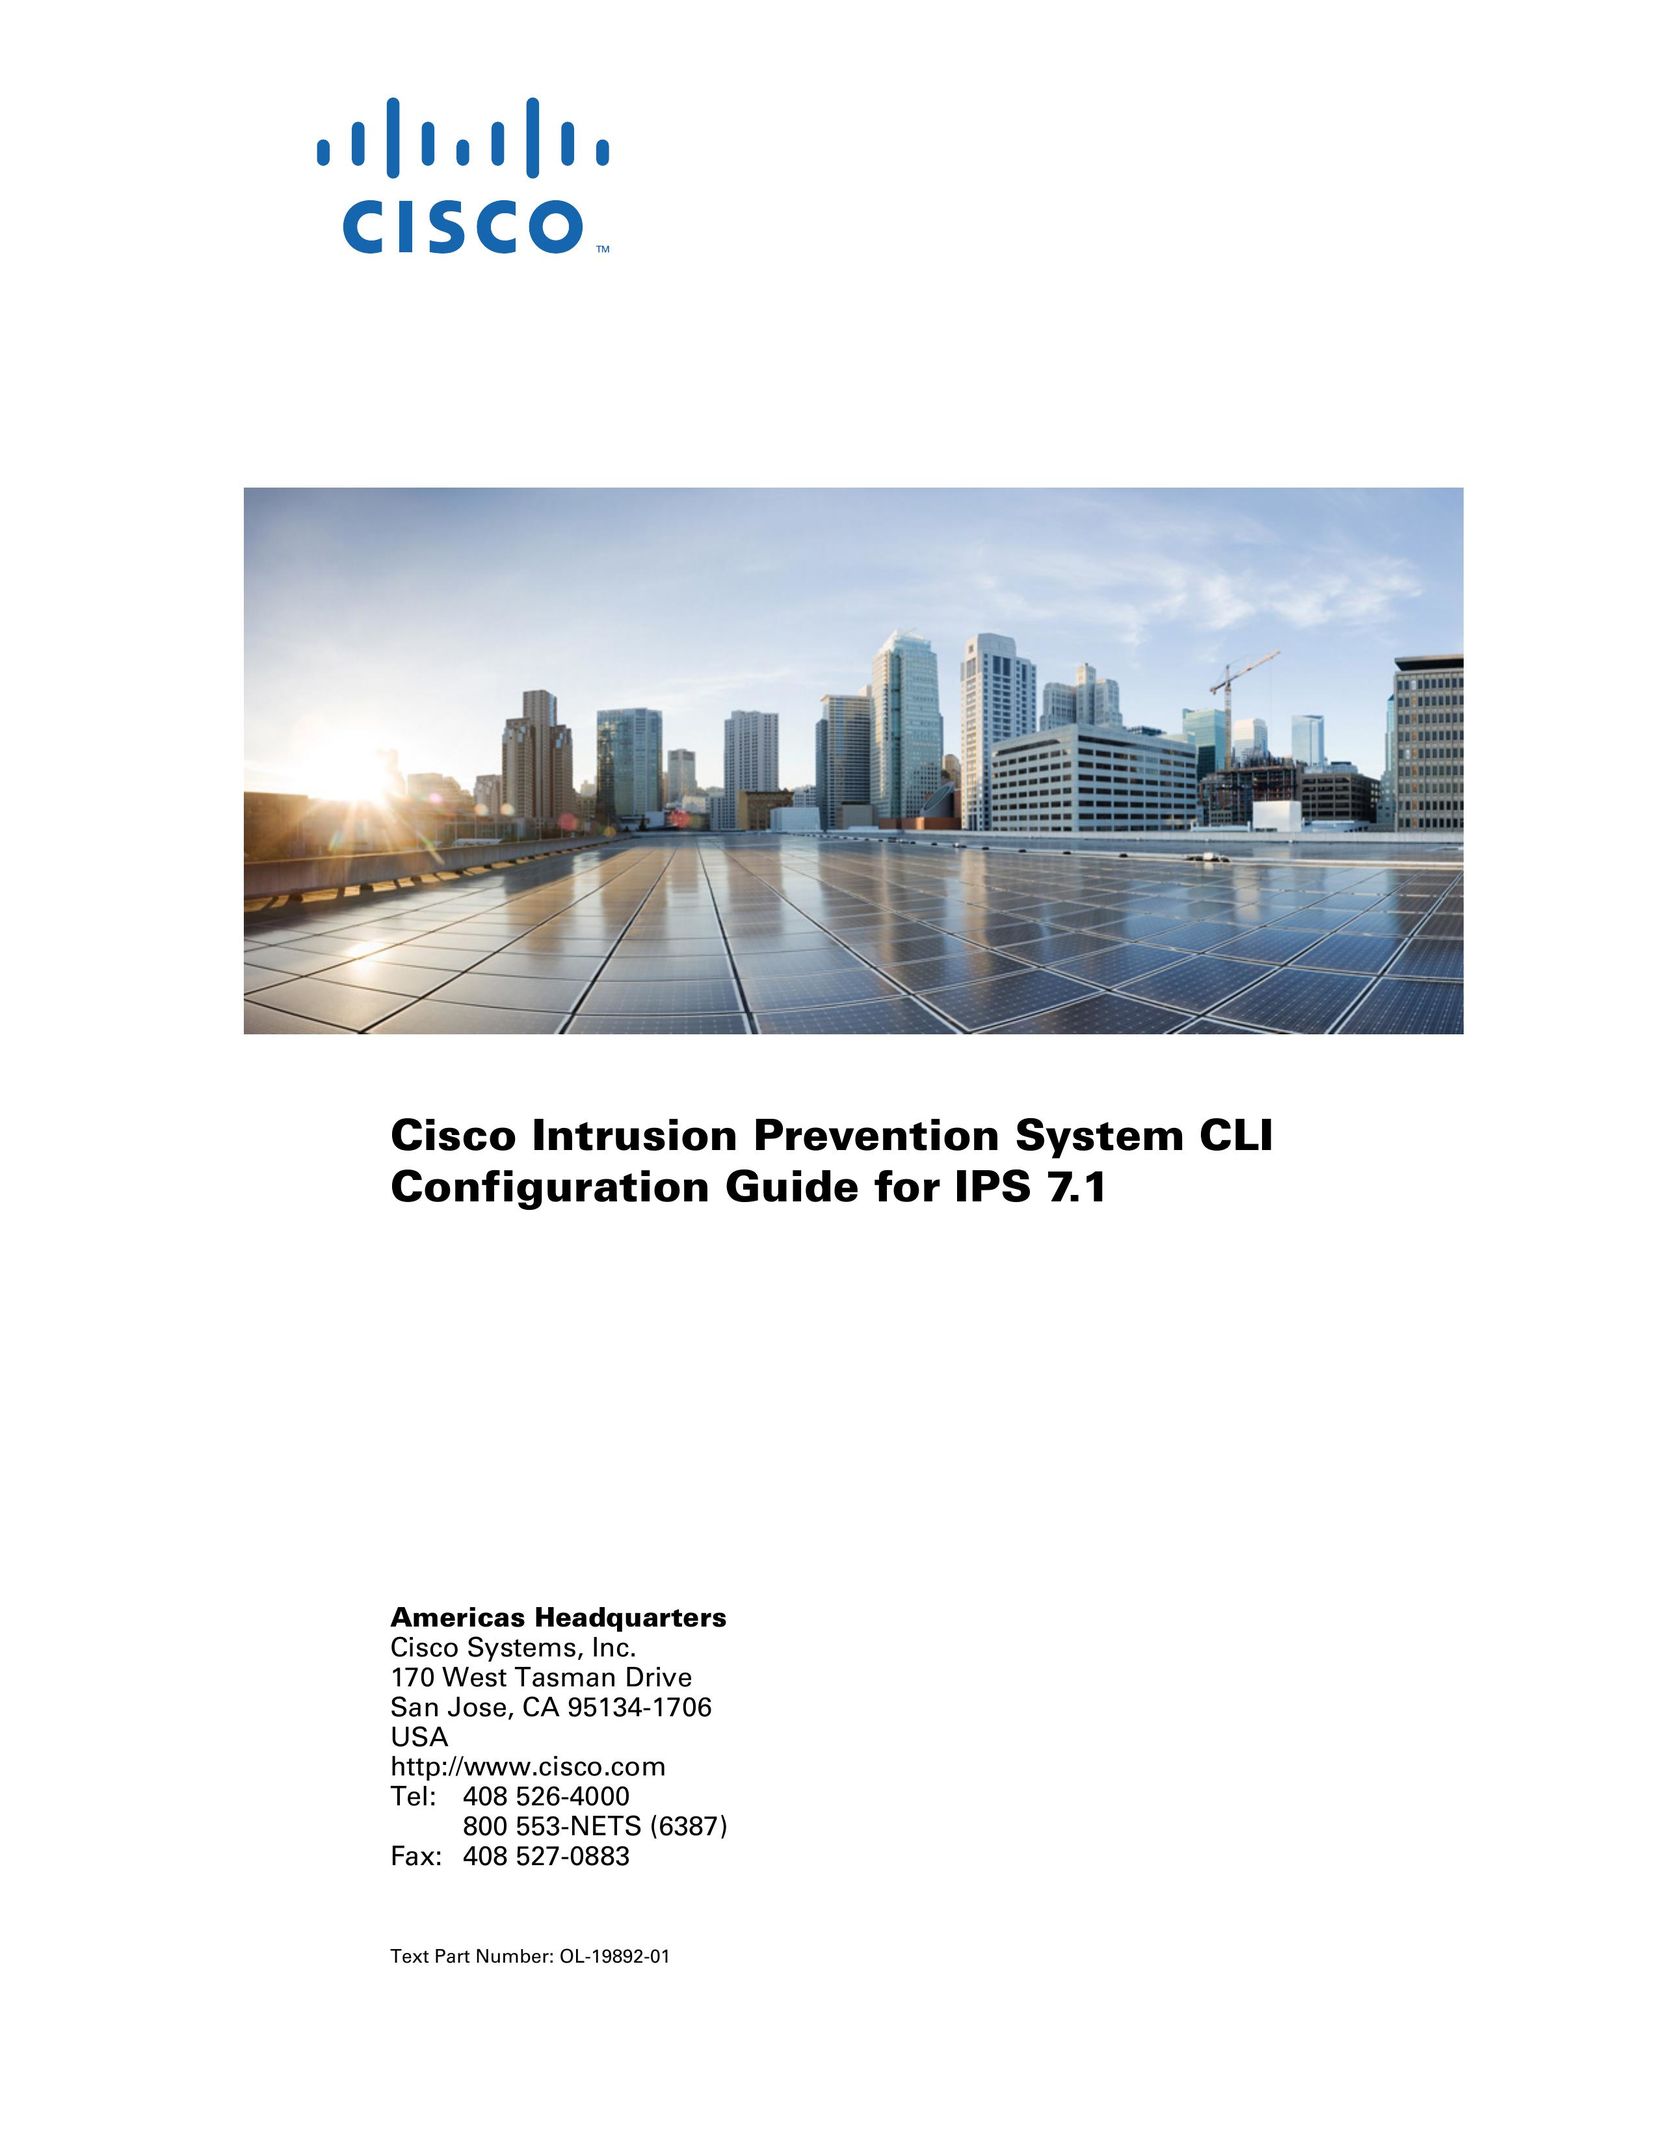 Cisco Systems IPS 7.1 Home Security System User Manual